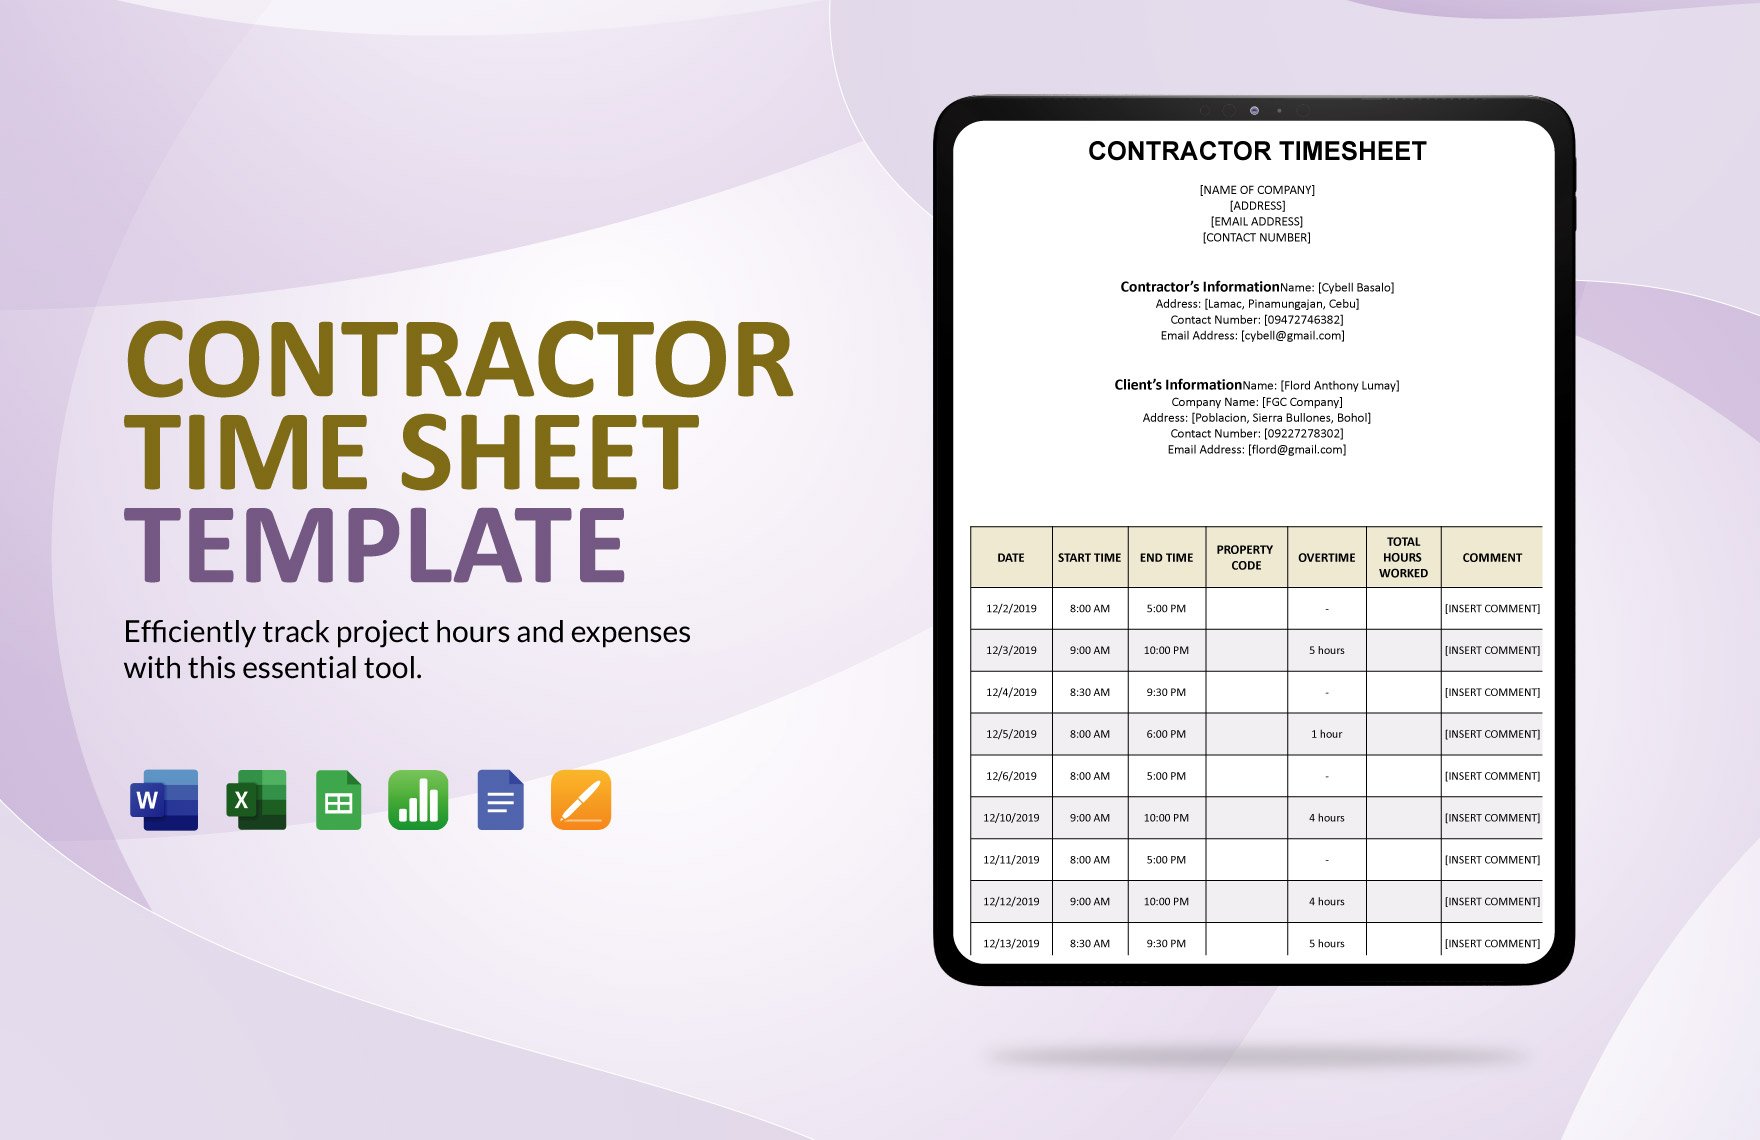 Contractor Time Sheet Template in Word, Google Docs, Excel, Google Sheets, Apple Pages, Apple Numbers